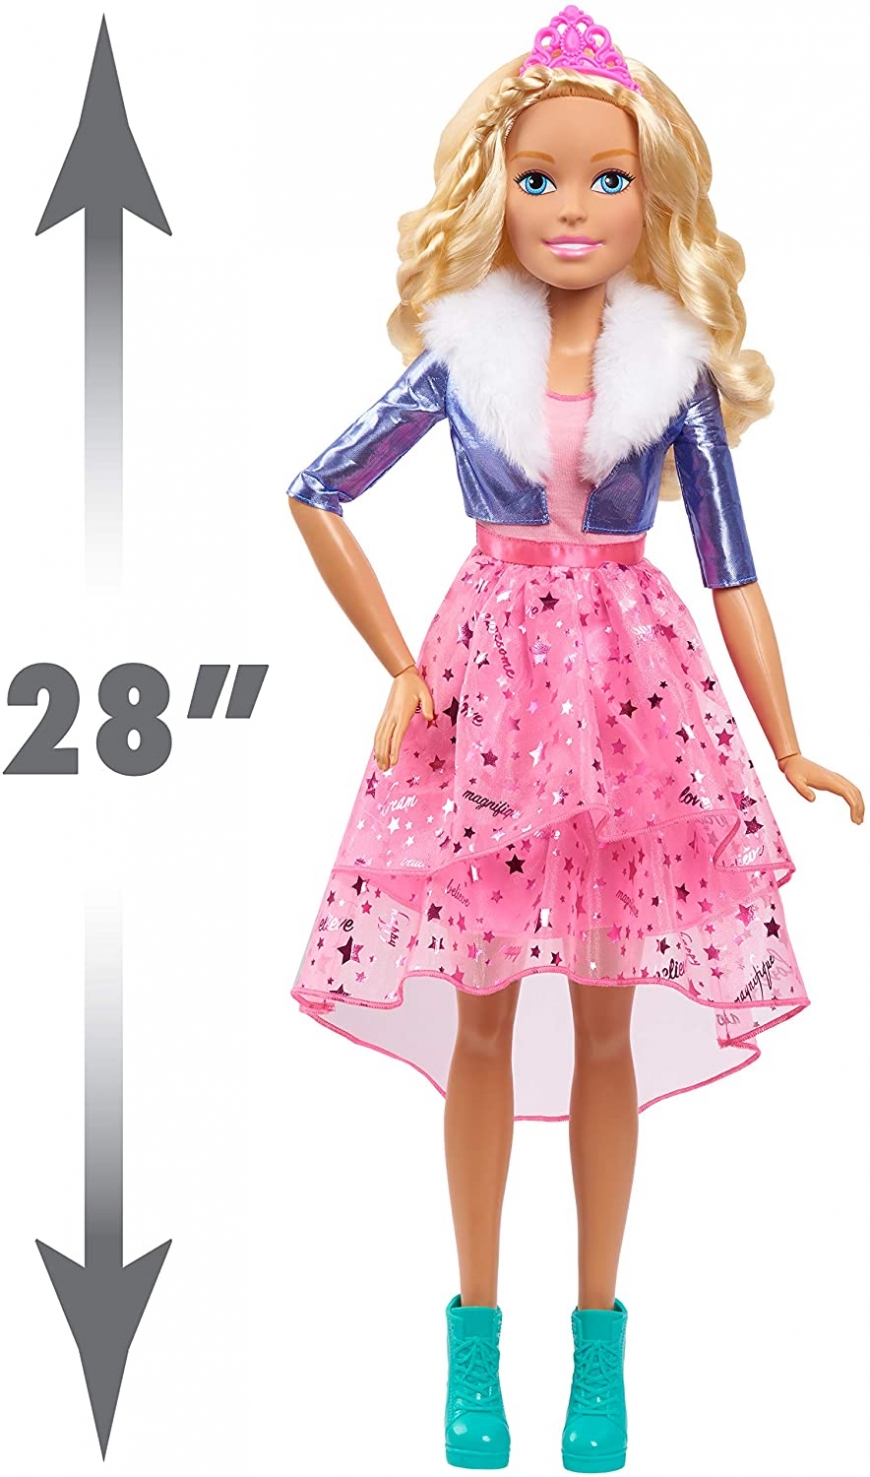 how tall is a barbie doll